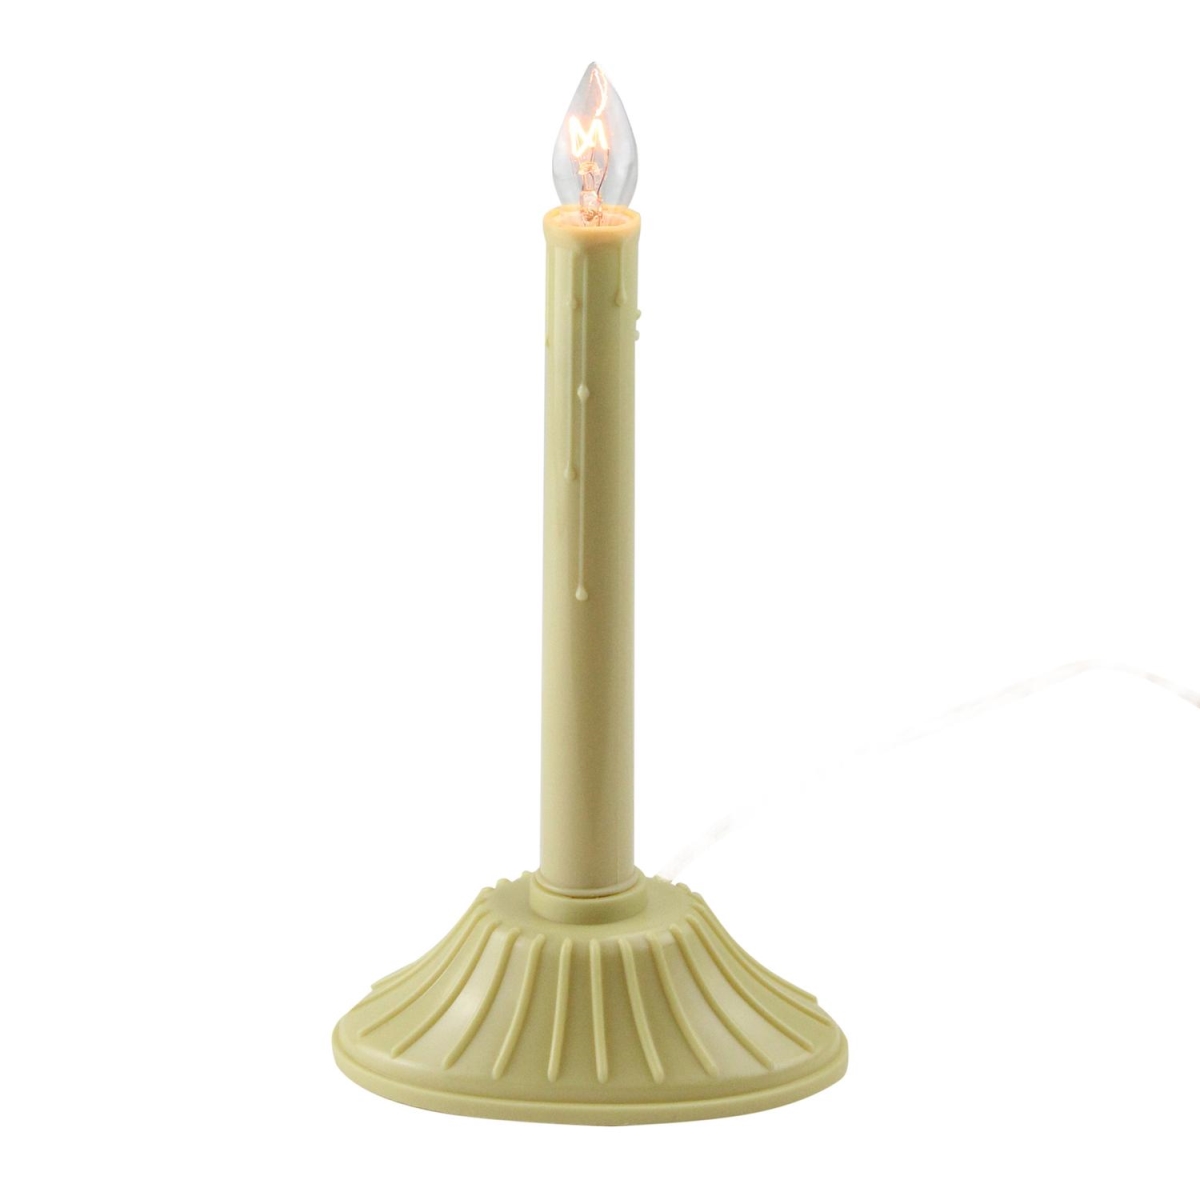 Picture of Northlight 32912613 9.5 in. Single Ivory Indoor Christmas Candolier Candle Lamp - Clear C7 Light